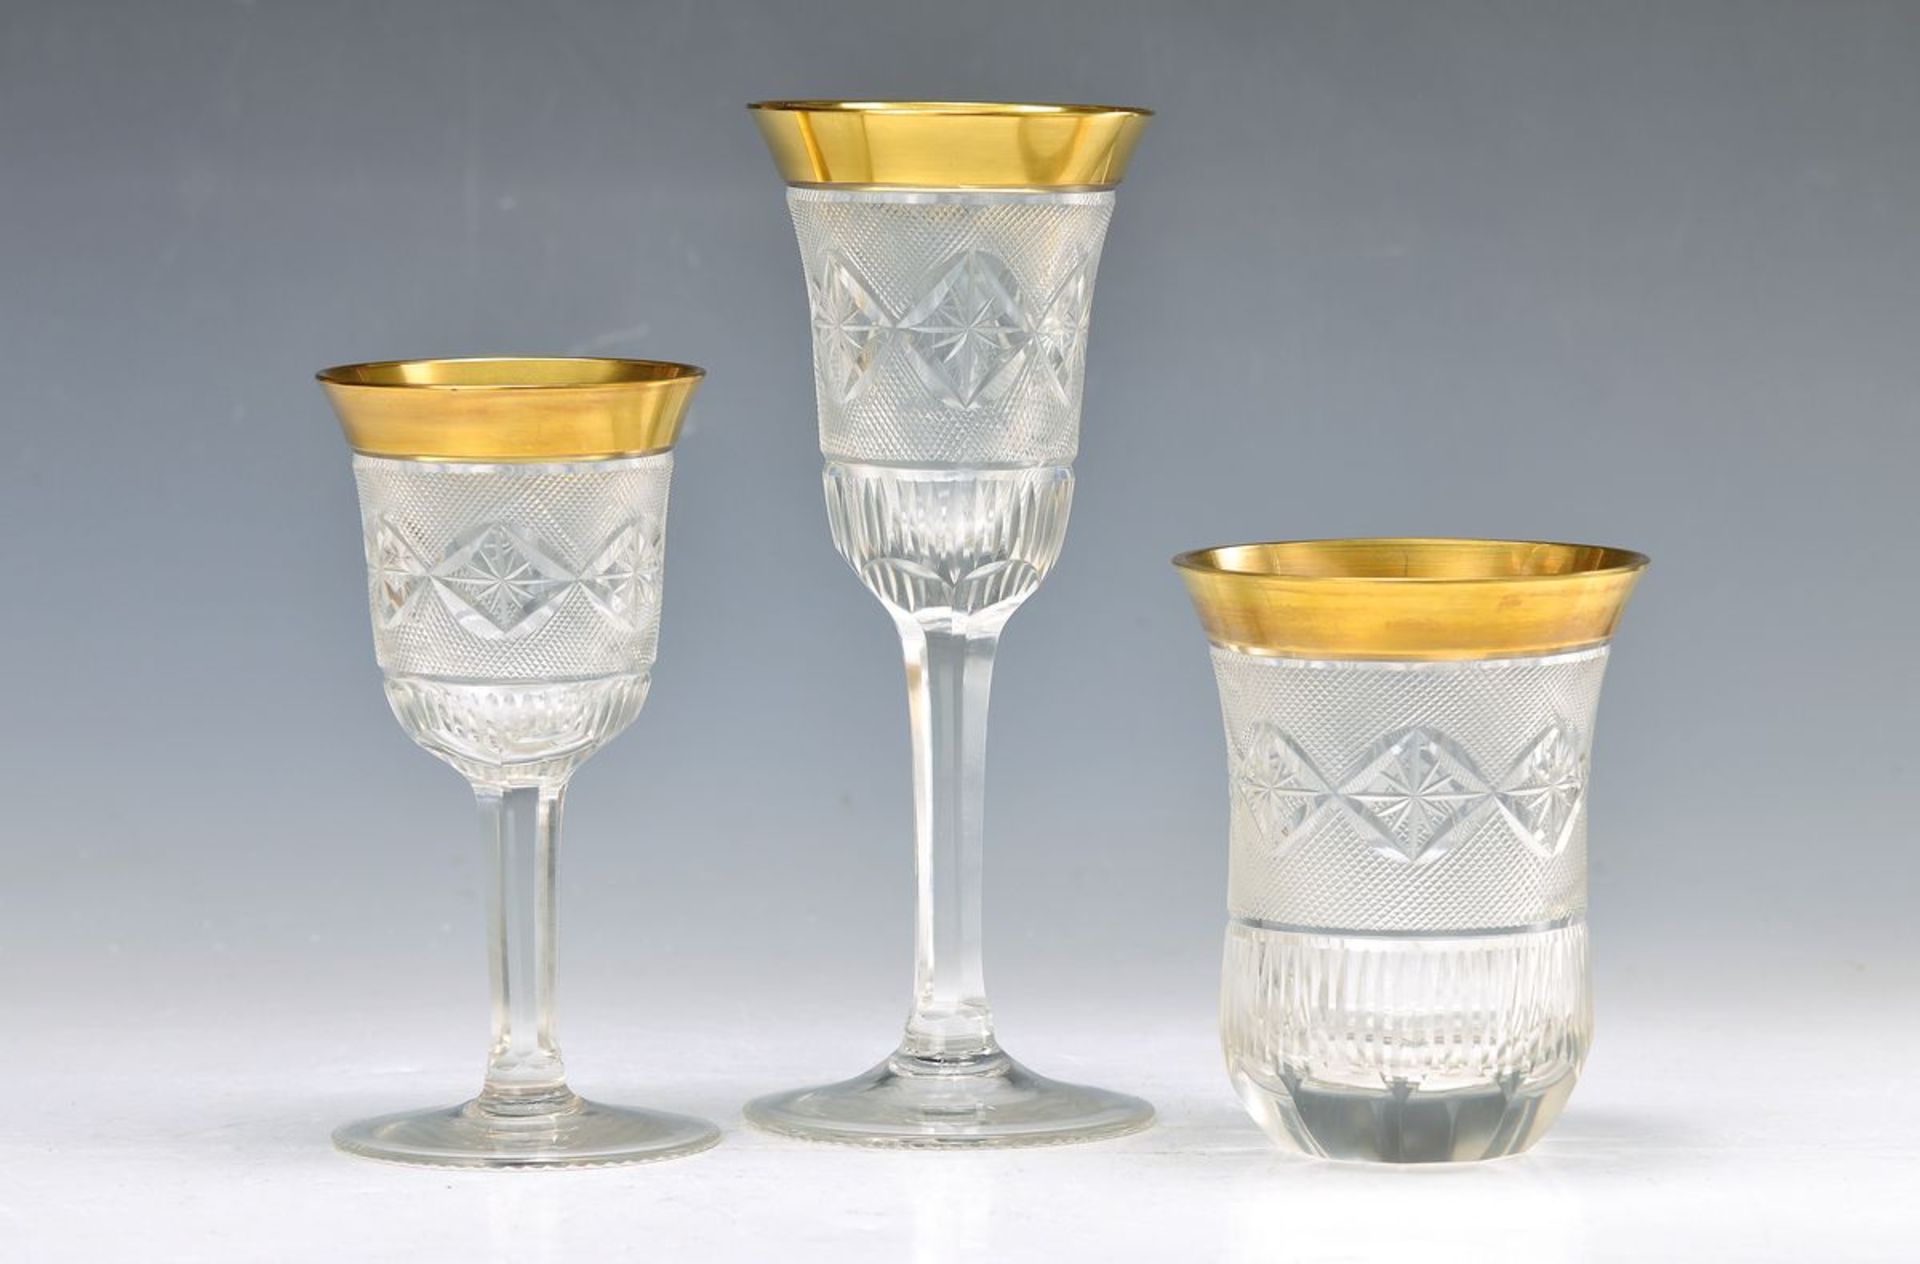 drinking glass set, German, around 1920/30, colorless glass, opulent polished, shaded decor and